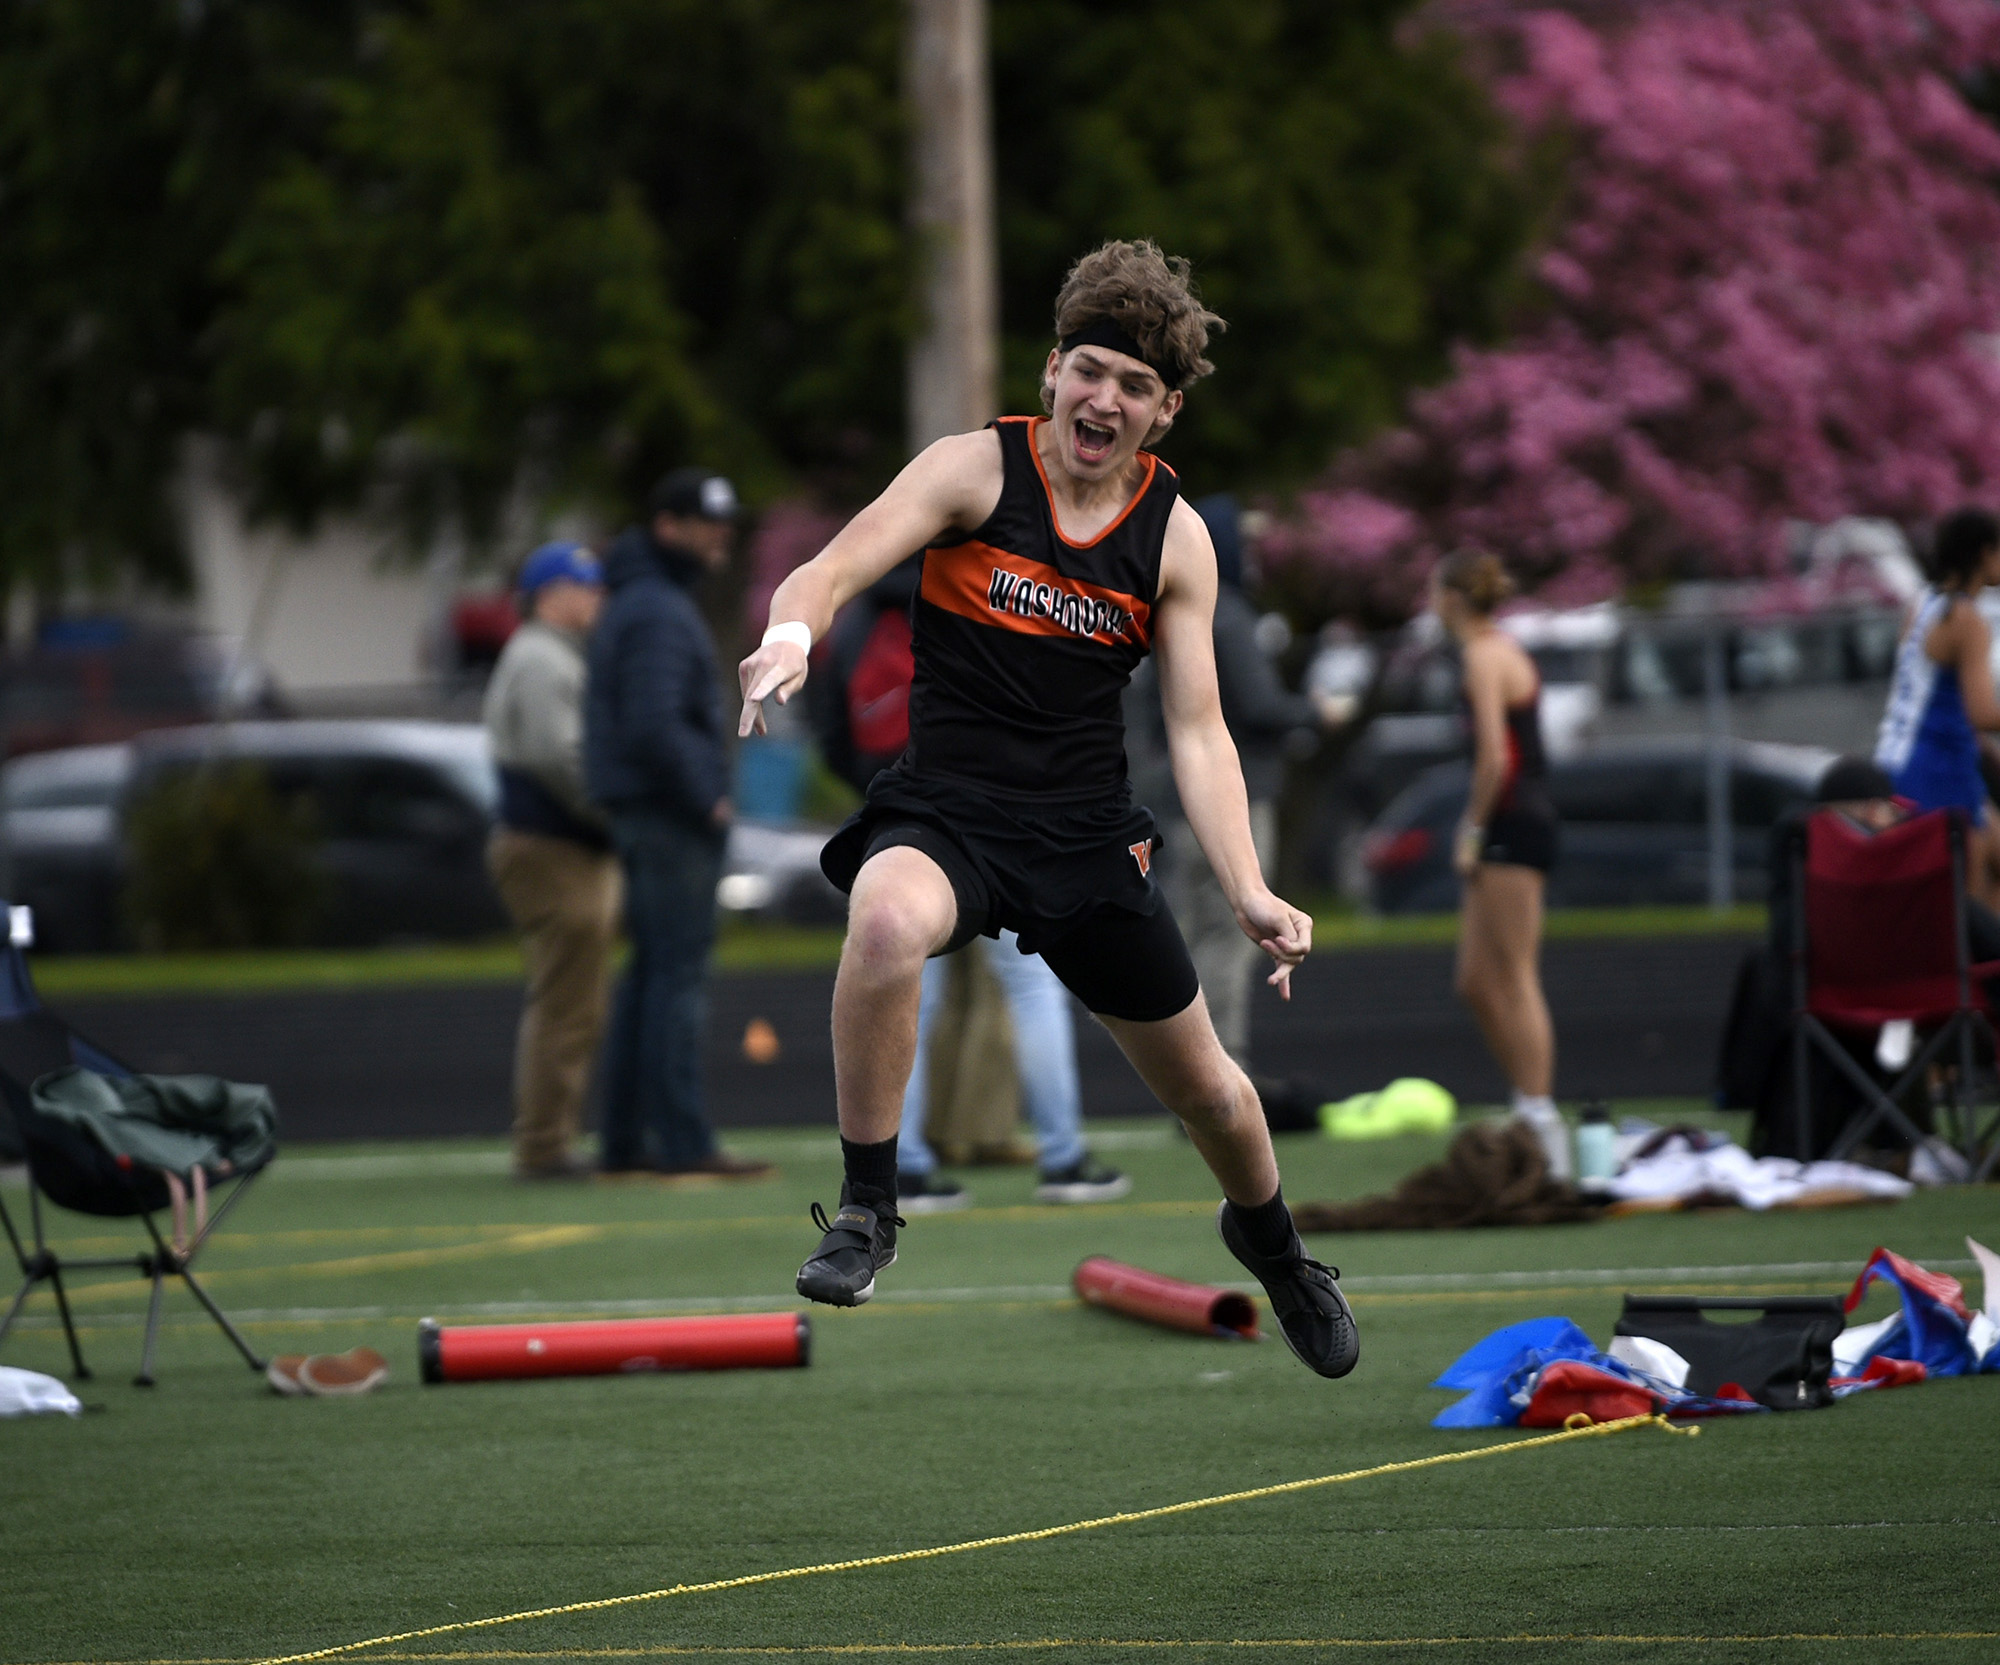 Luke Livengood of Washougal shouts while competing in the boys javelin at the Panther Invitational track and field meet at Washougal High School on Friday, April 26, 2024.